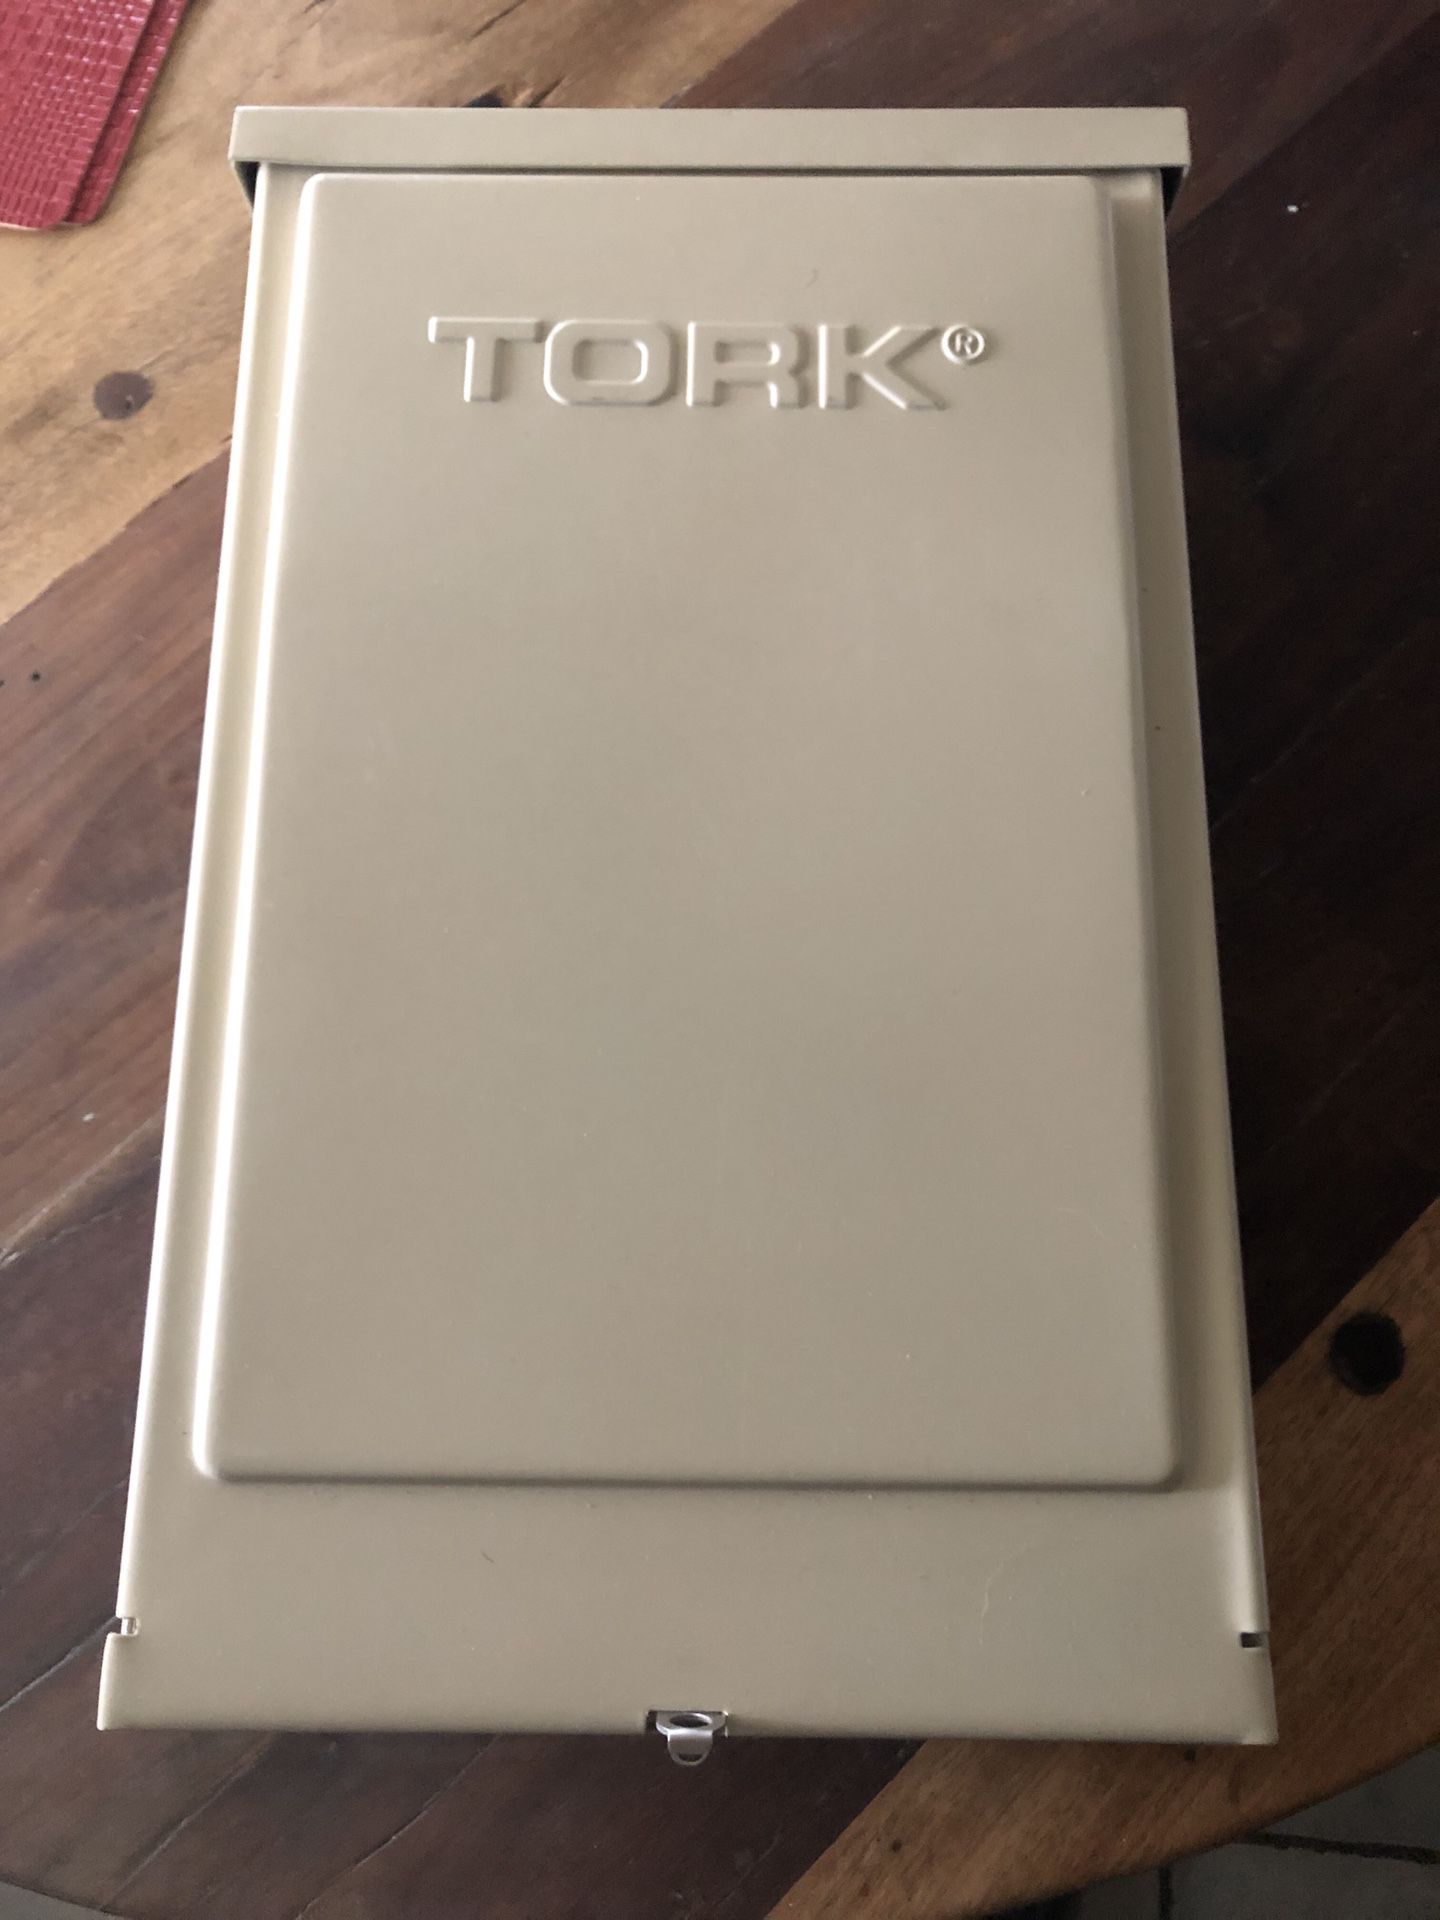 Tork pp100r pool spa timer panel box and timers